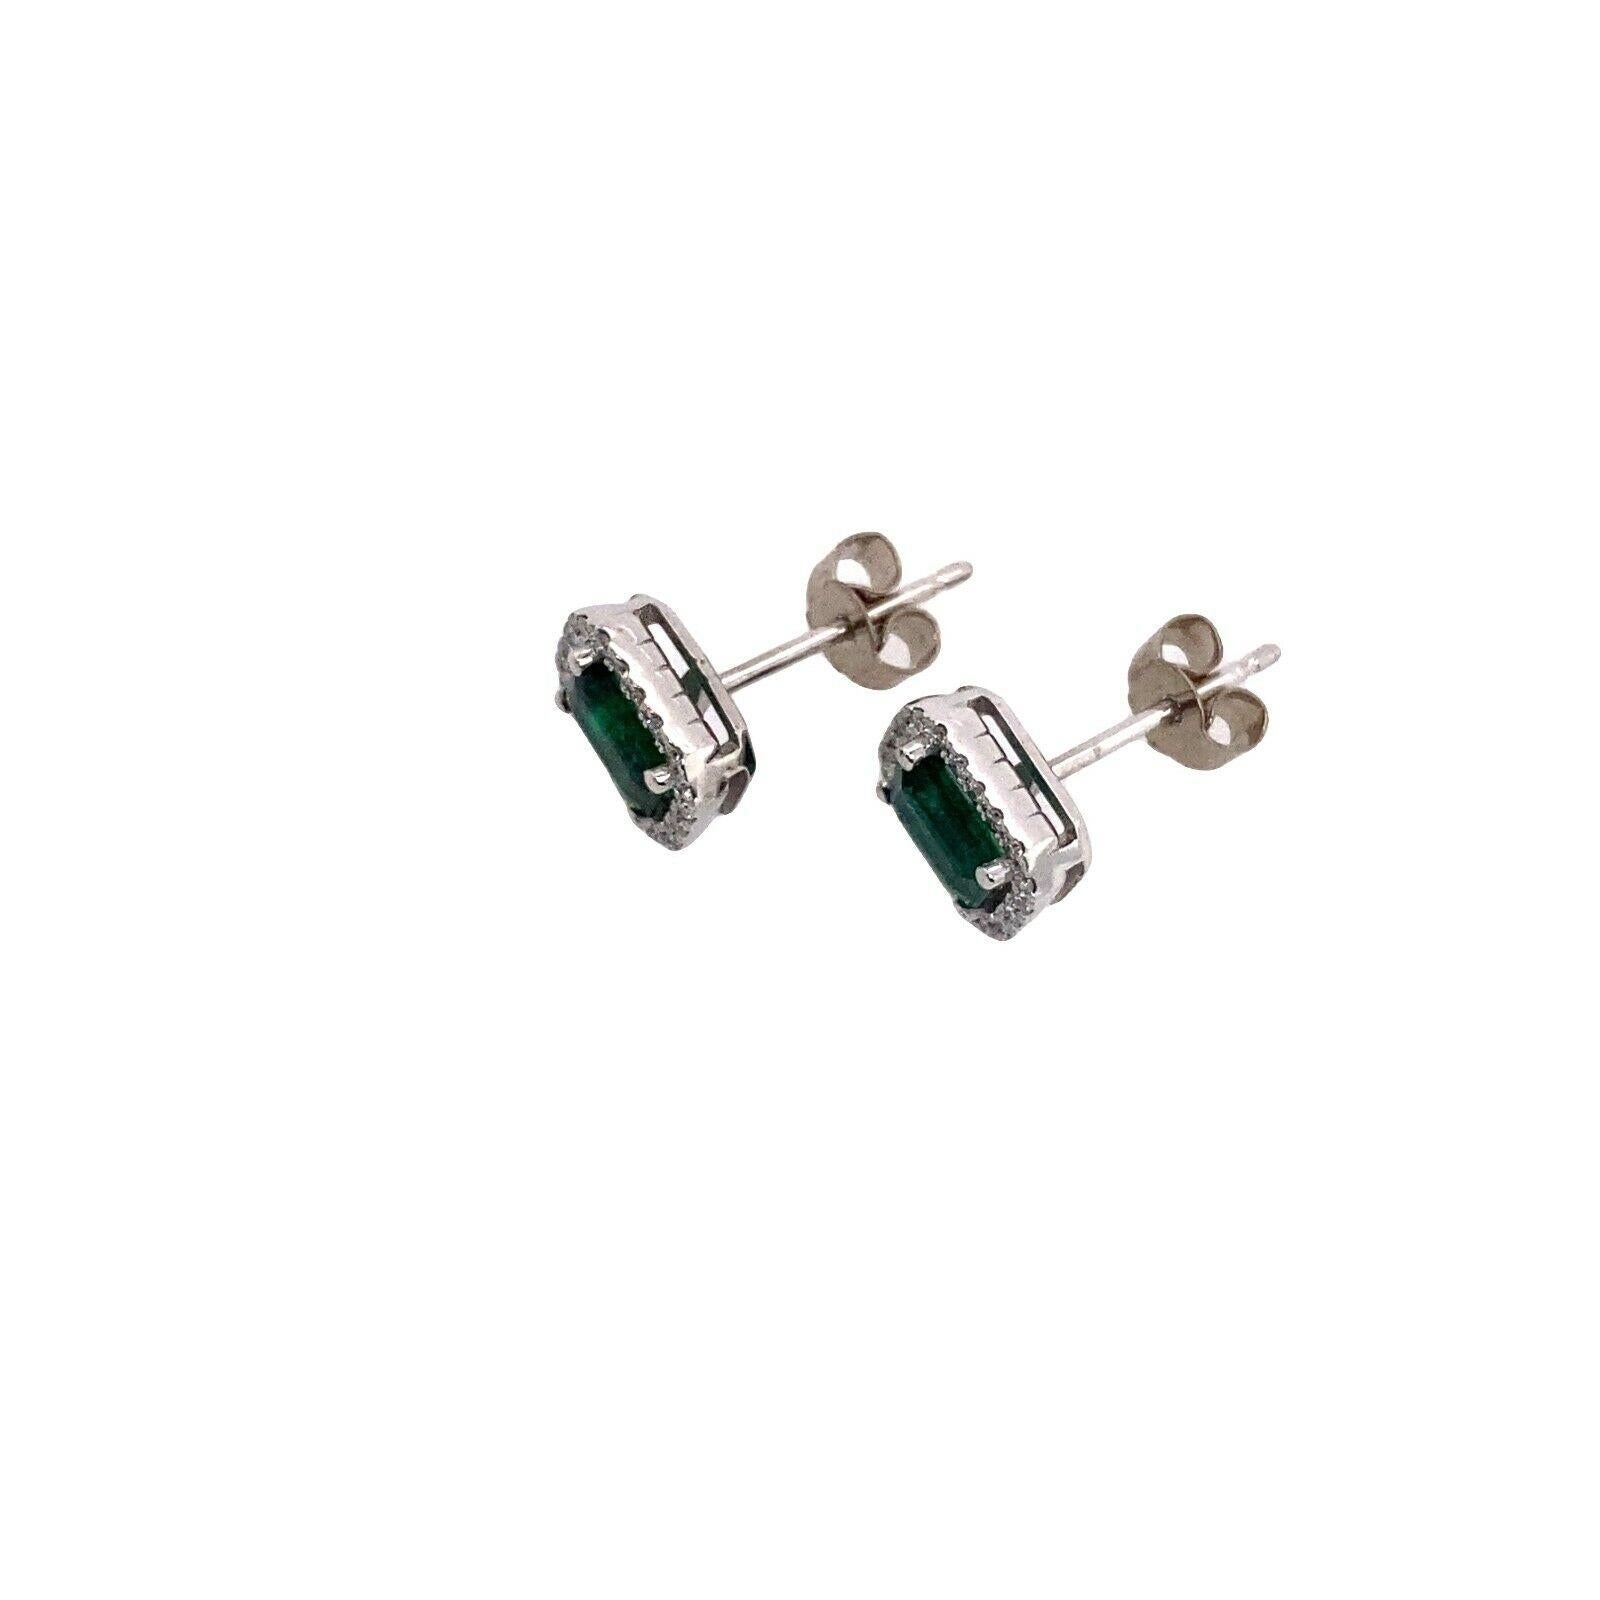 Emerald Cut Zambian Emeralds Surrounded by Diamonds Set in 18ct White Gold In New Condition For Sale In London, GB